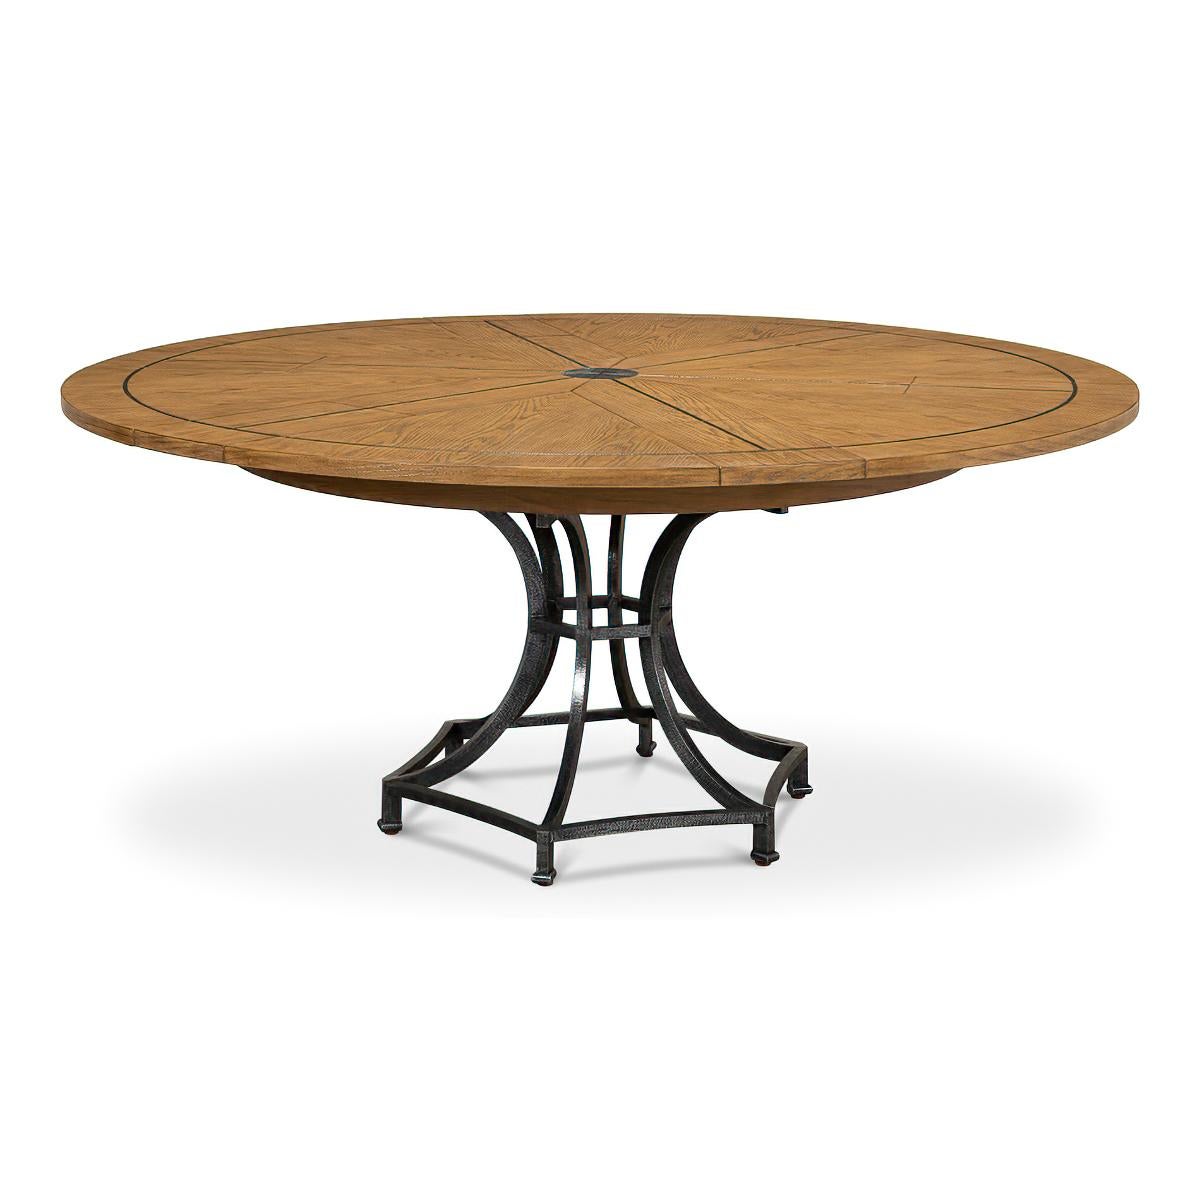 Metal Modern Industrial Round Dining Table - Warm Oak For Sale